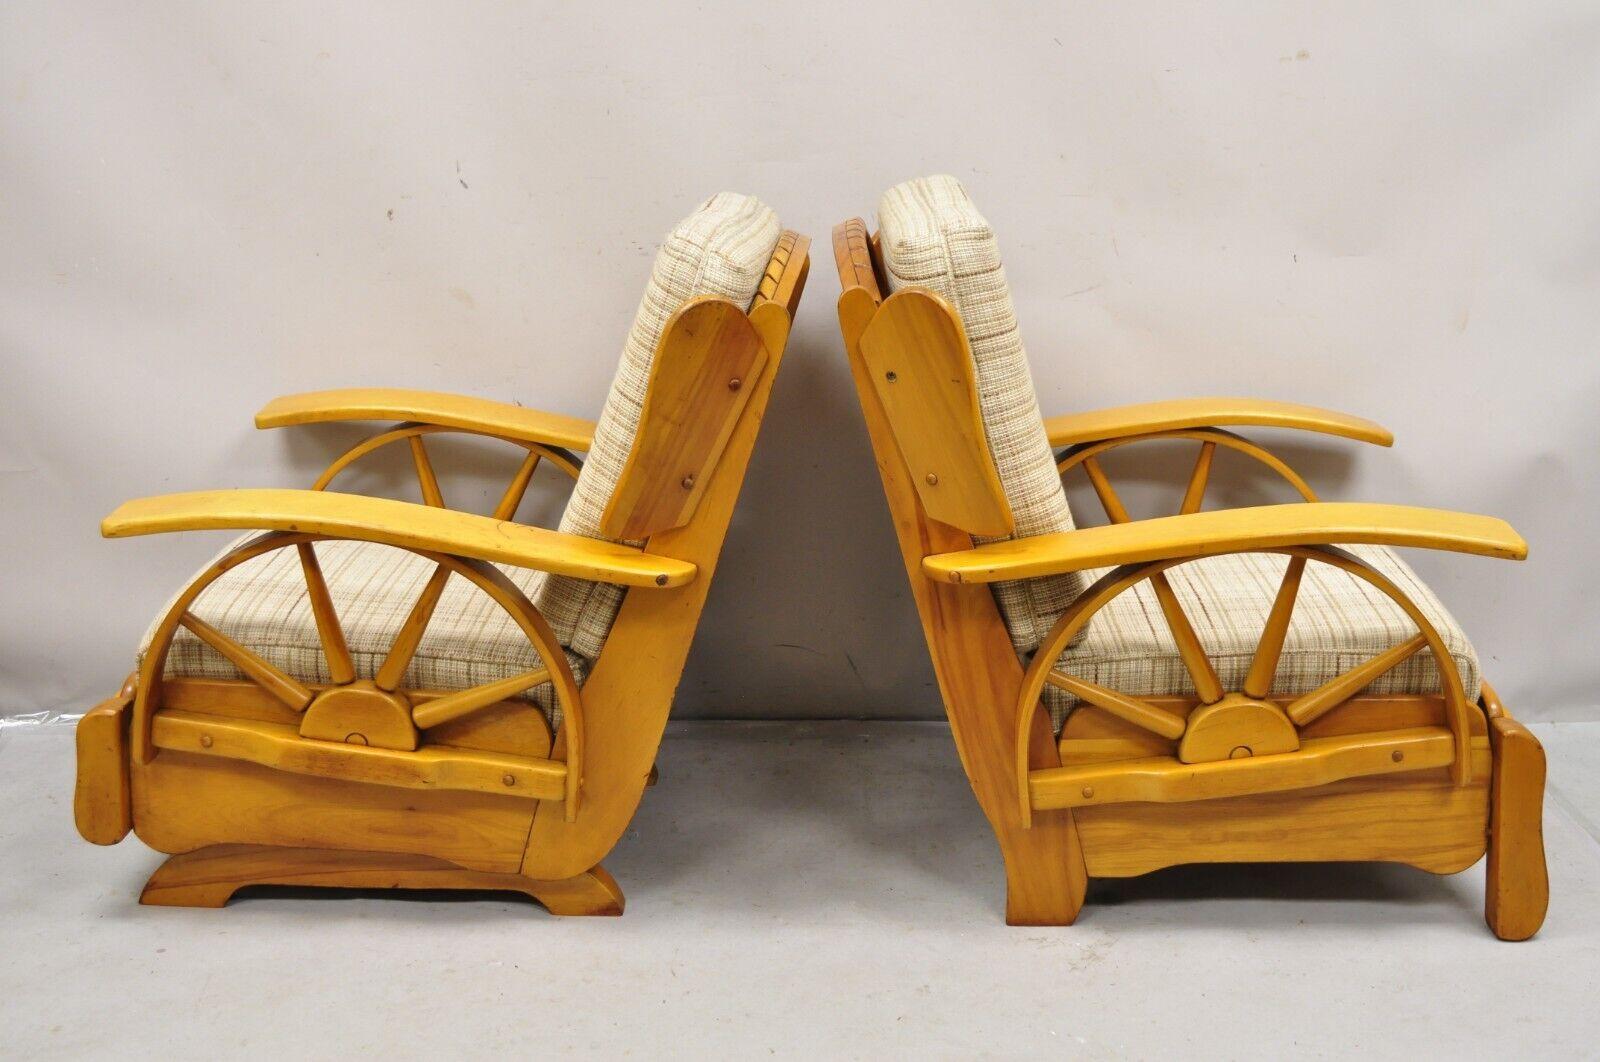 Vintage Maple Wagon Wheel Western Ranch Lounge Chair and Platform Rocker - a Pair. Set featured includes one platform rocker and one stationary lounge chair. Circa 1950s. Measurements: 34.5